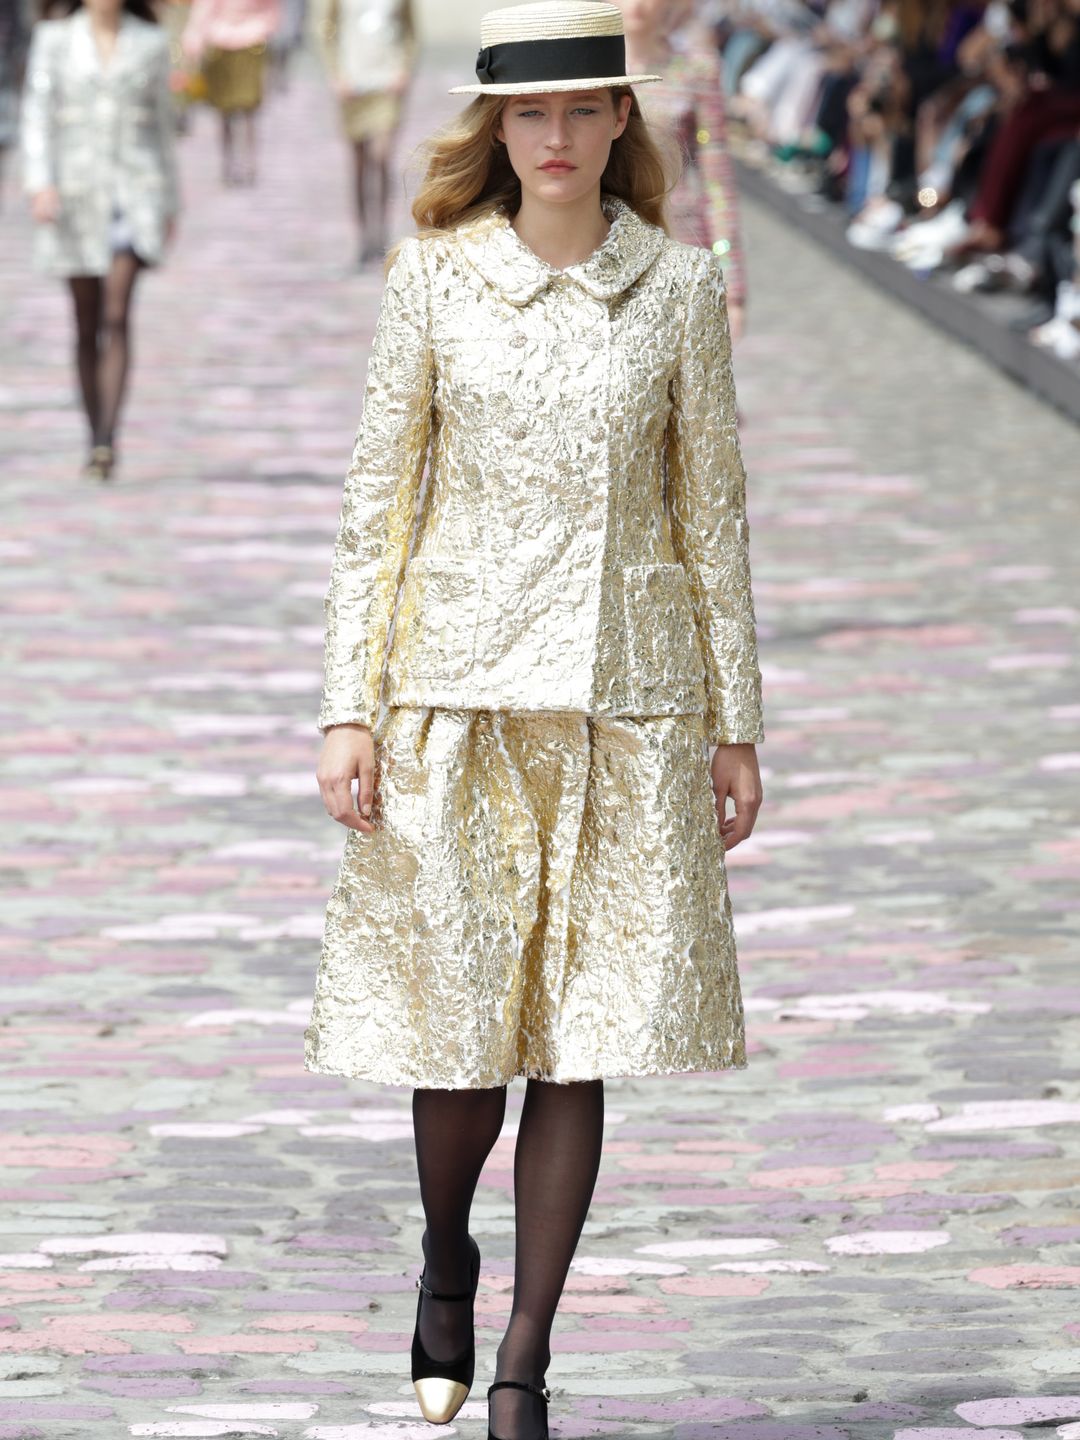 Chanel model wearing gold jacquard outfit 